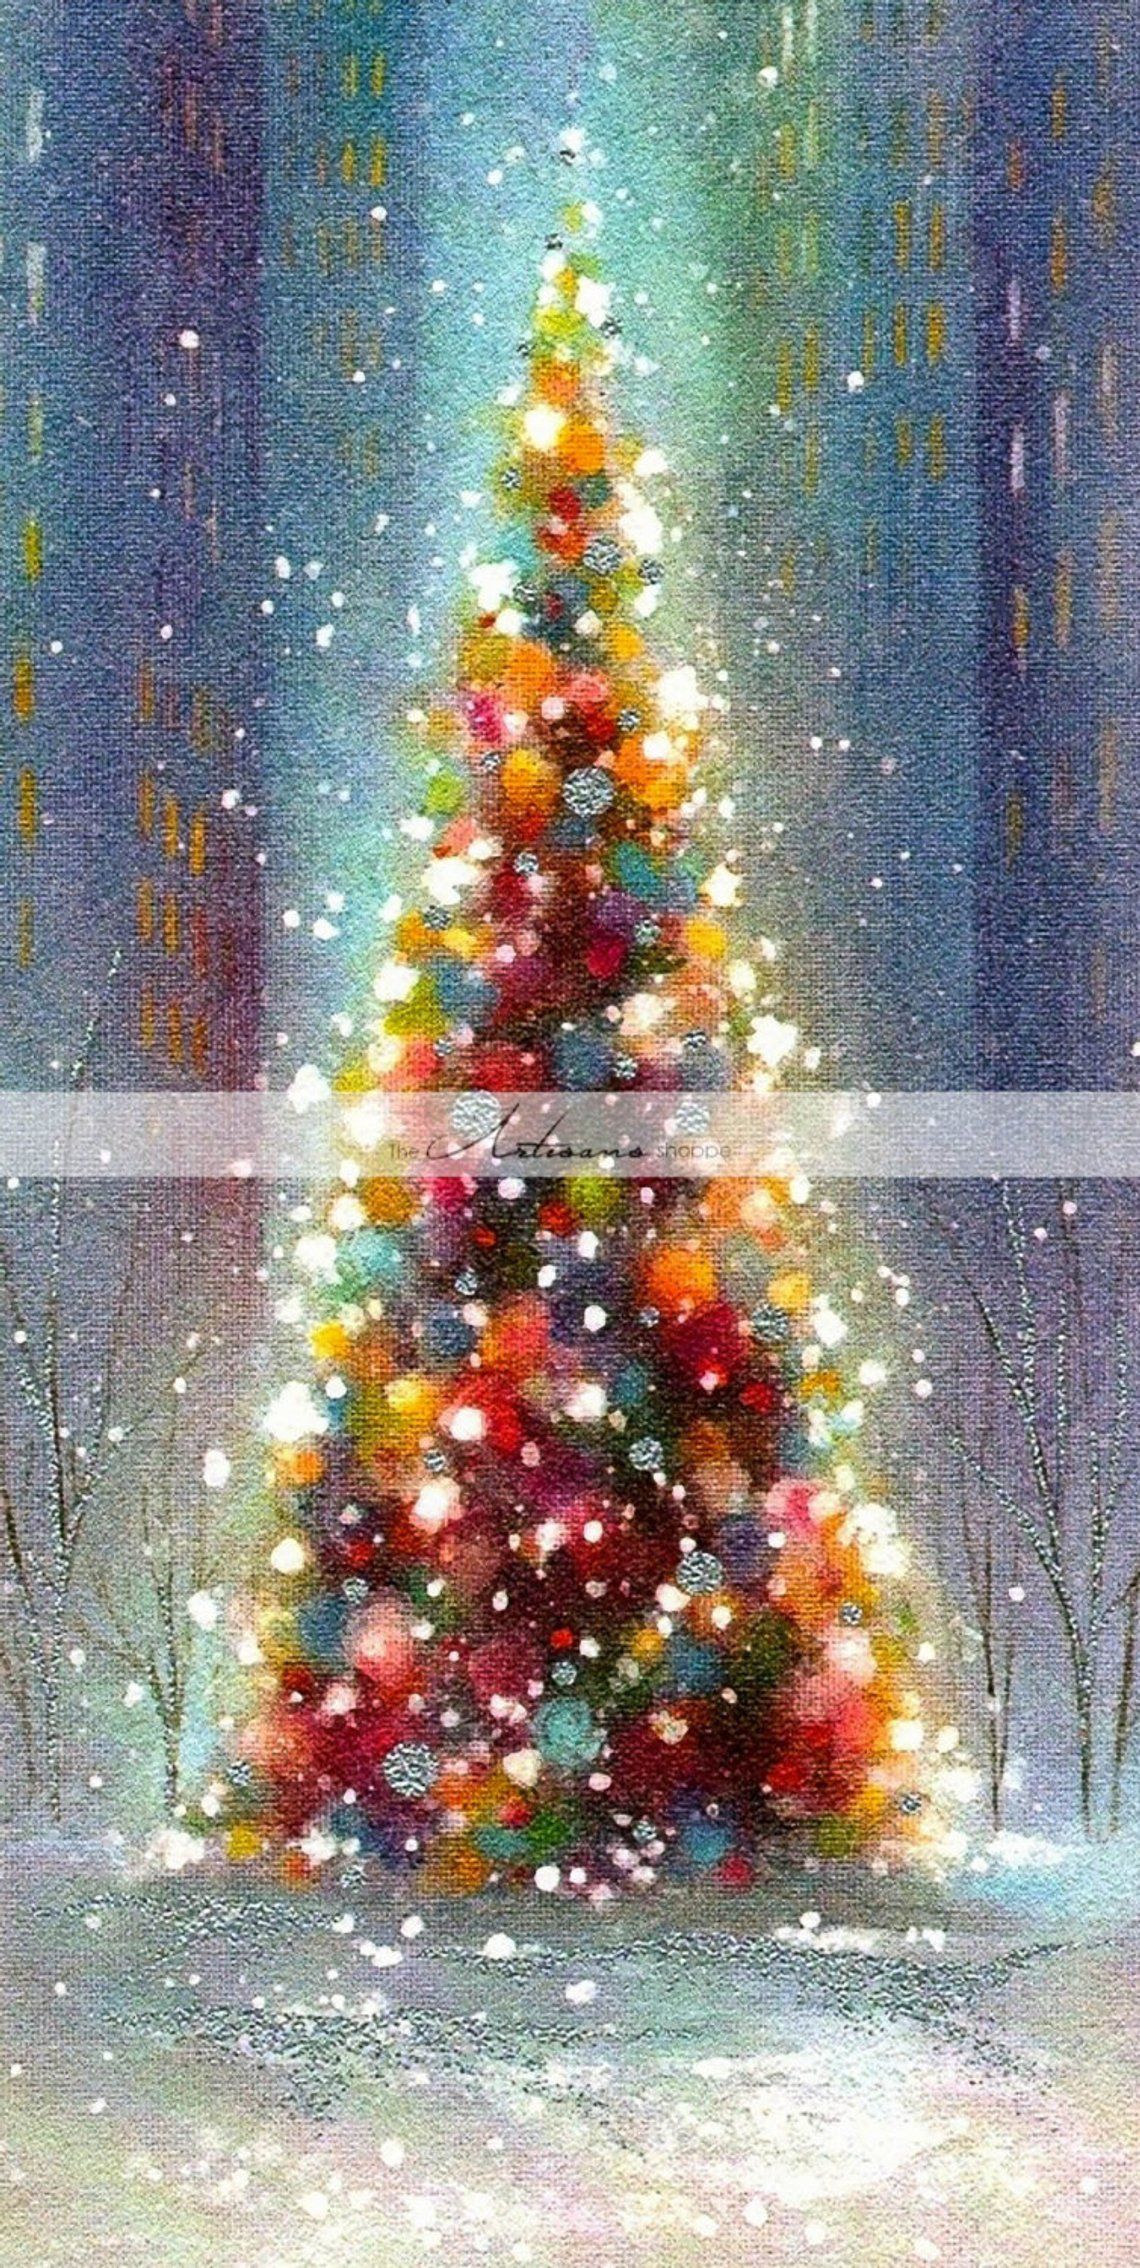 Instant Printable Download Christmas Tree Vintage Card Etsy